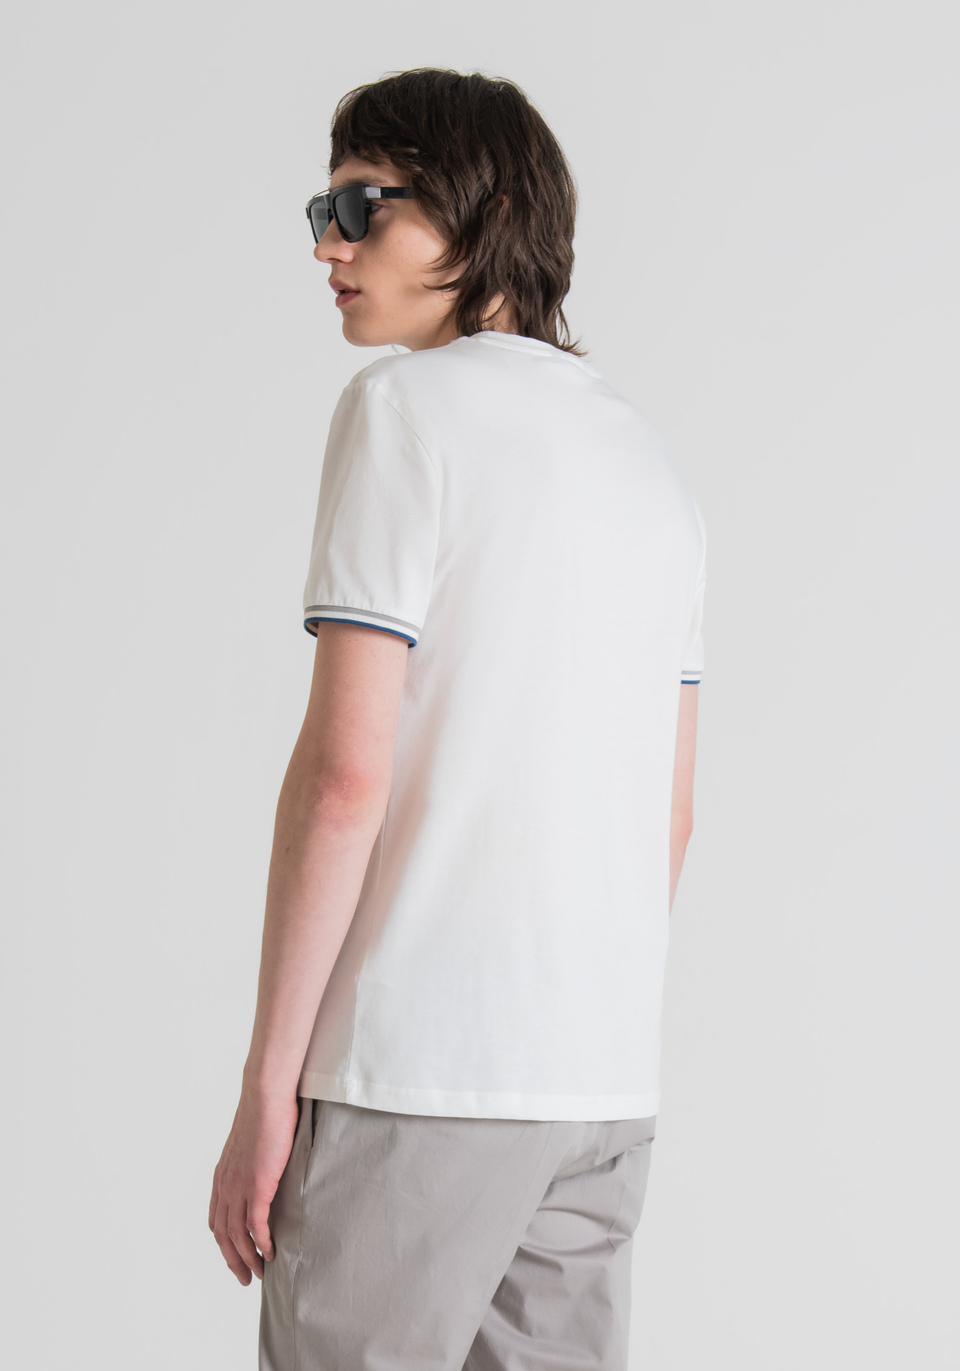 SLIM FIT T-SHIRT IN COTTON WITH RUBBERISED LOGO PRINT - Antony Morato Online Shop